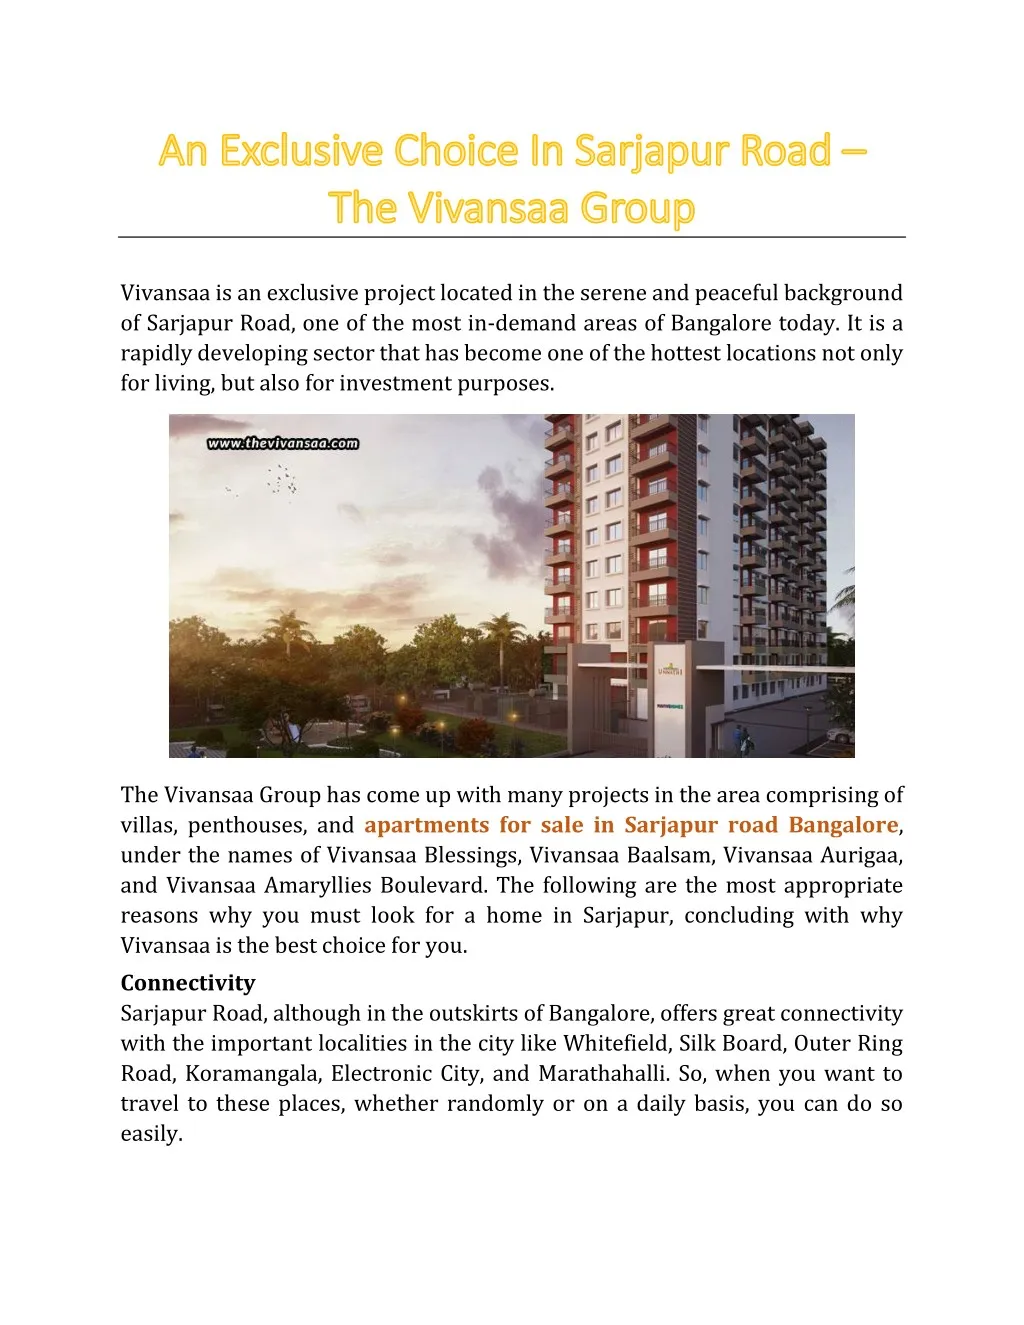 vivansaa is an exclusive project located